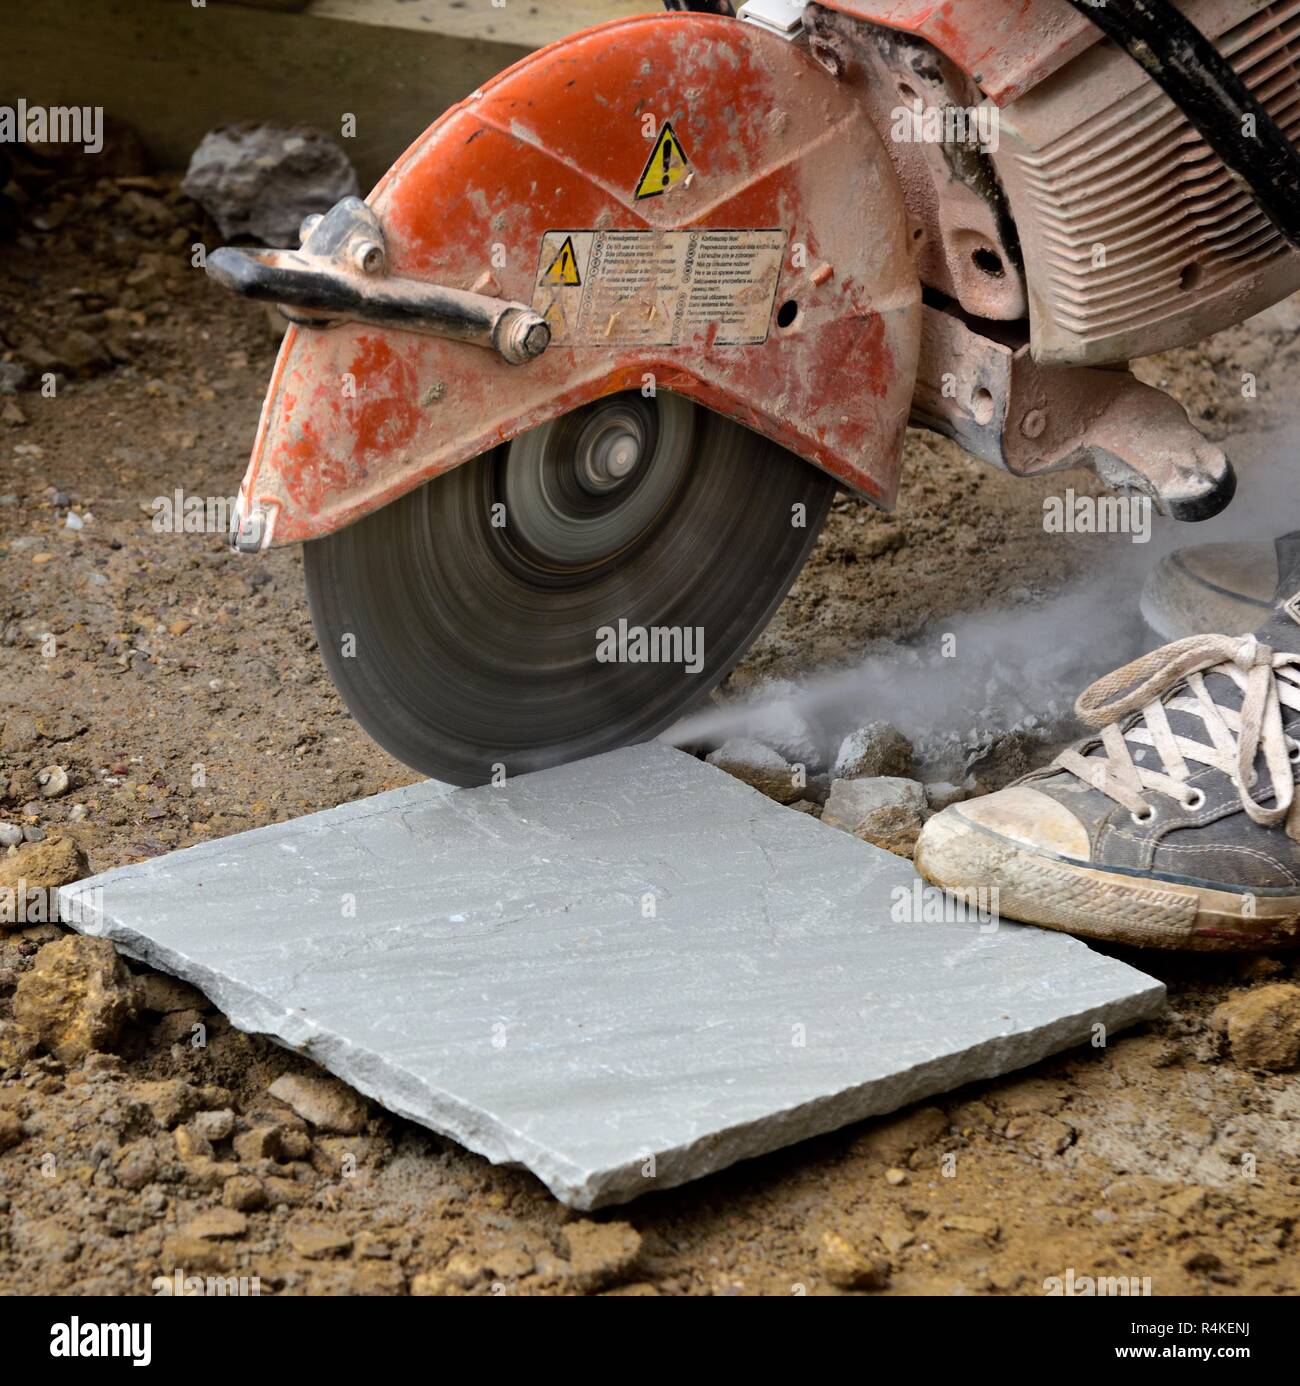 Stone paving slab being cut with a circular petrol powered saw Stock Photo